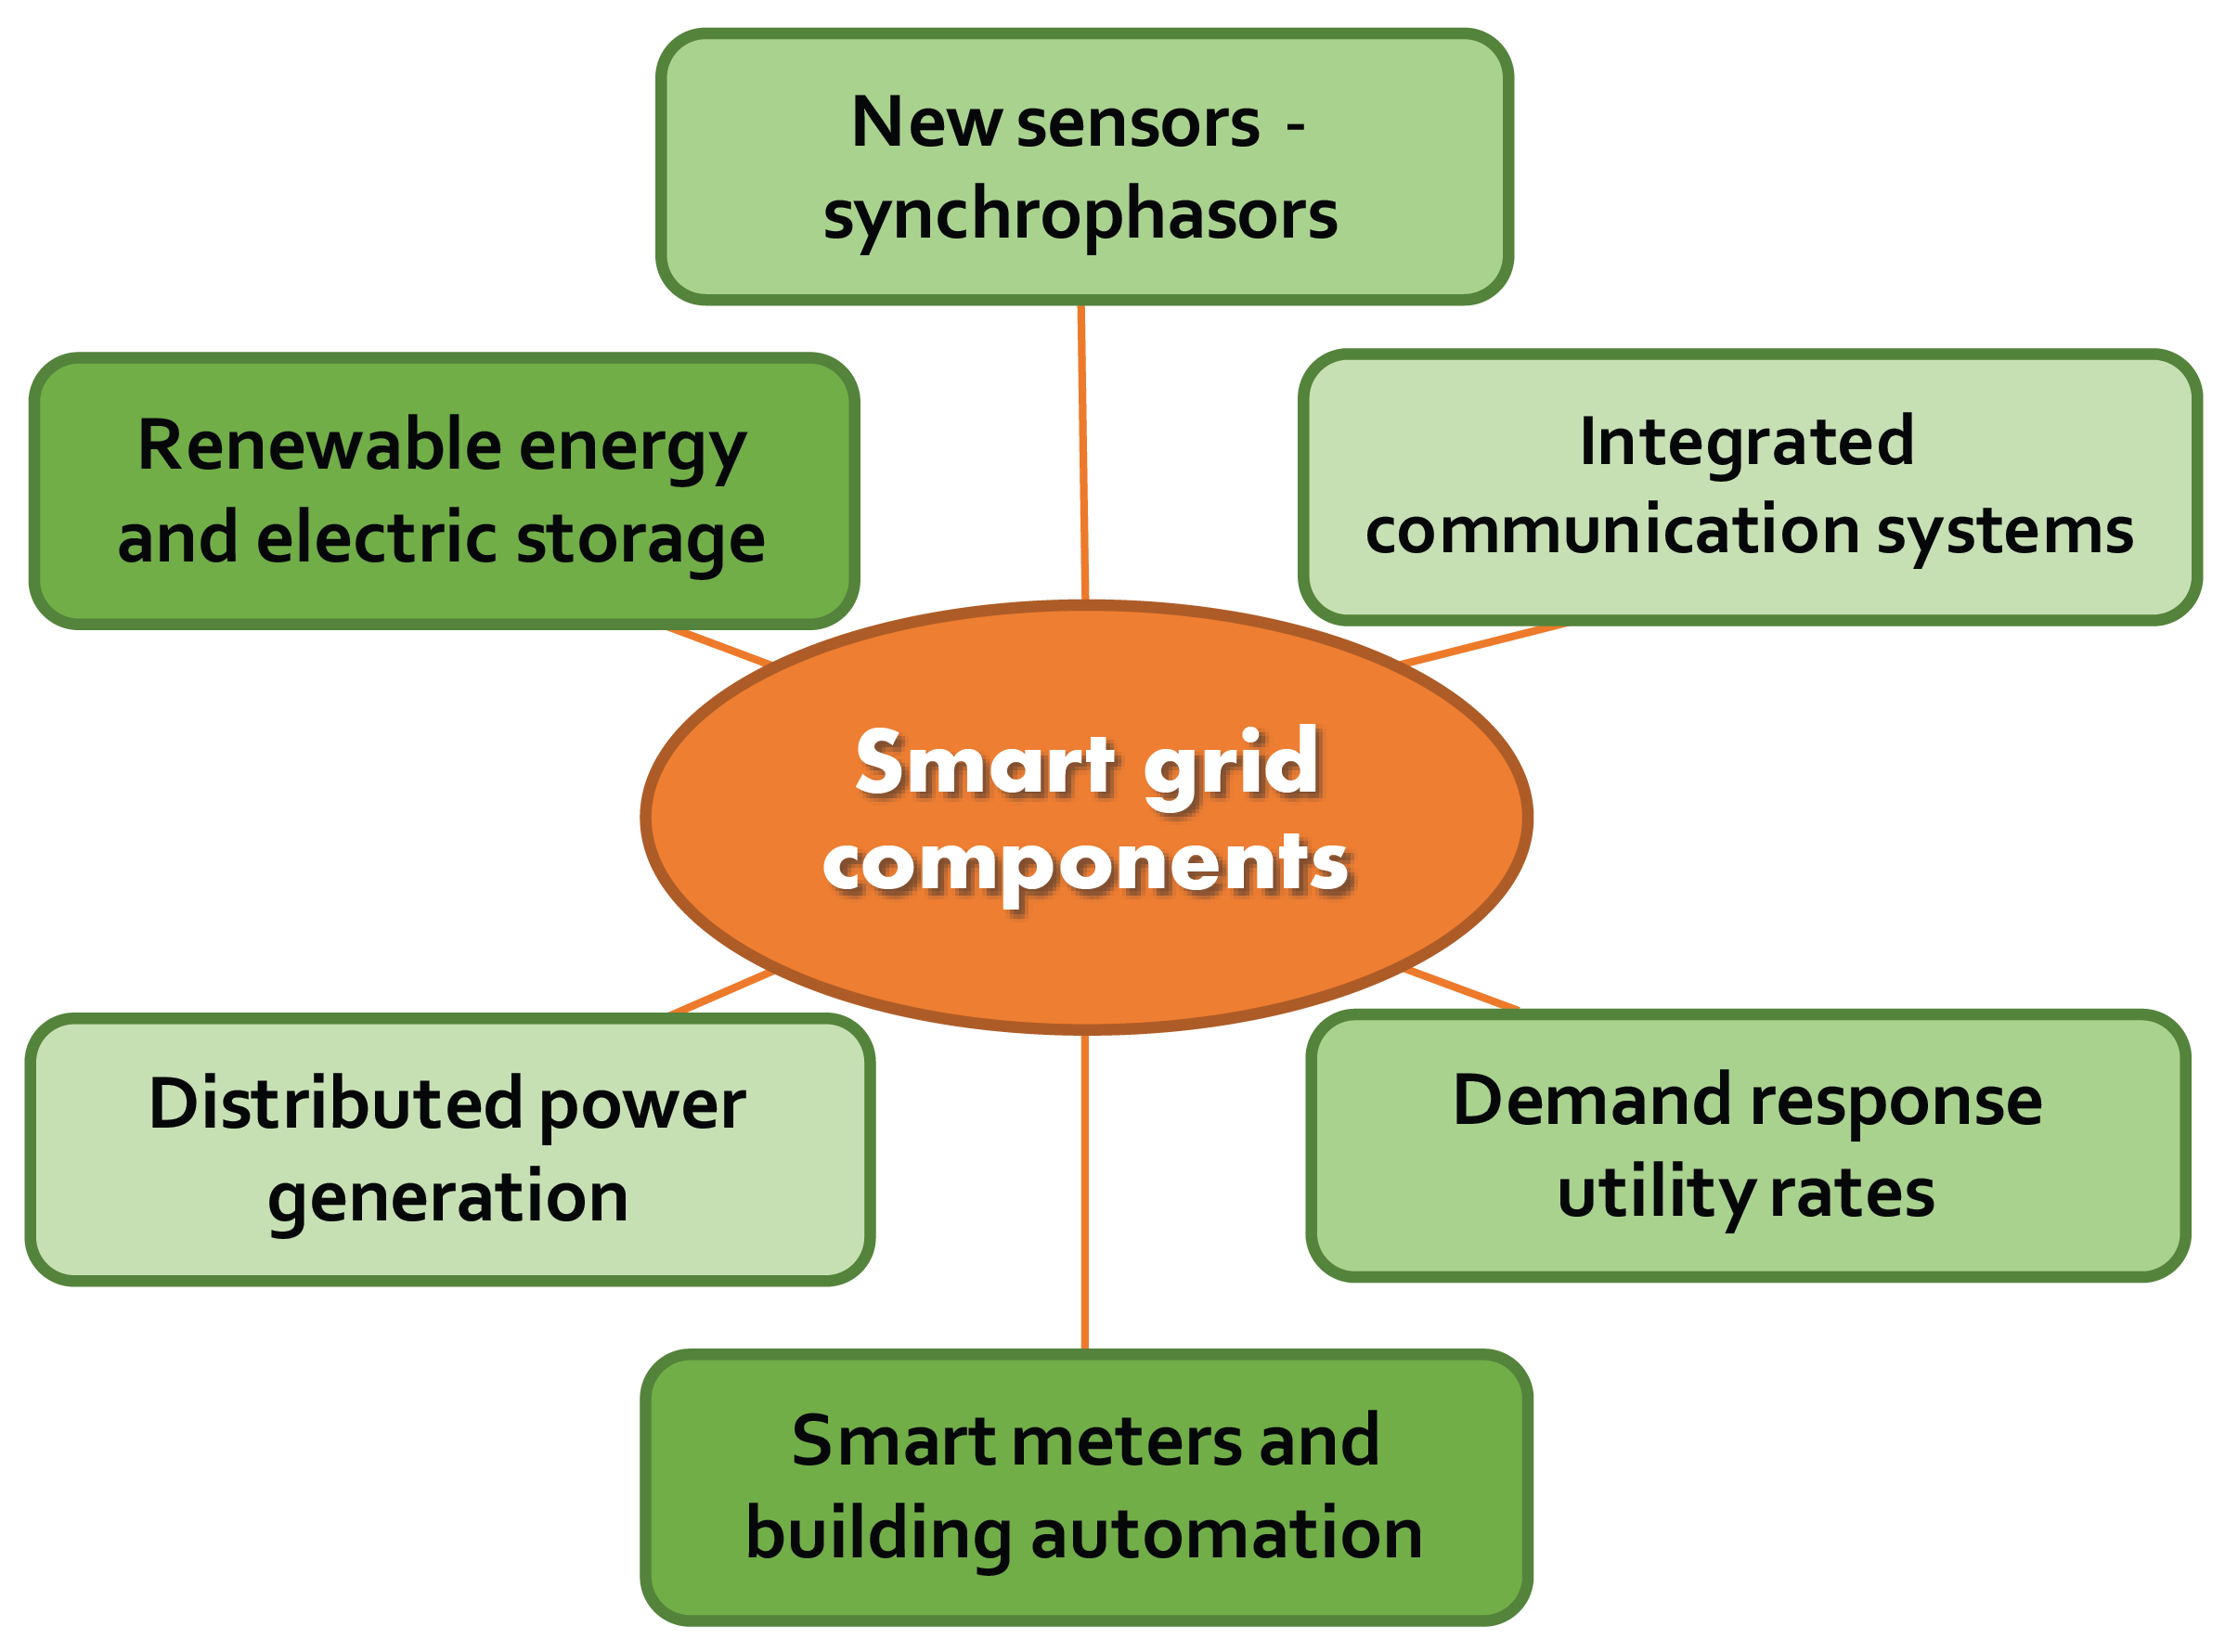 types of grid systems